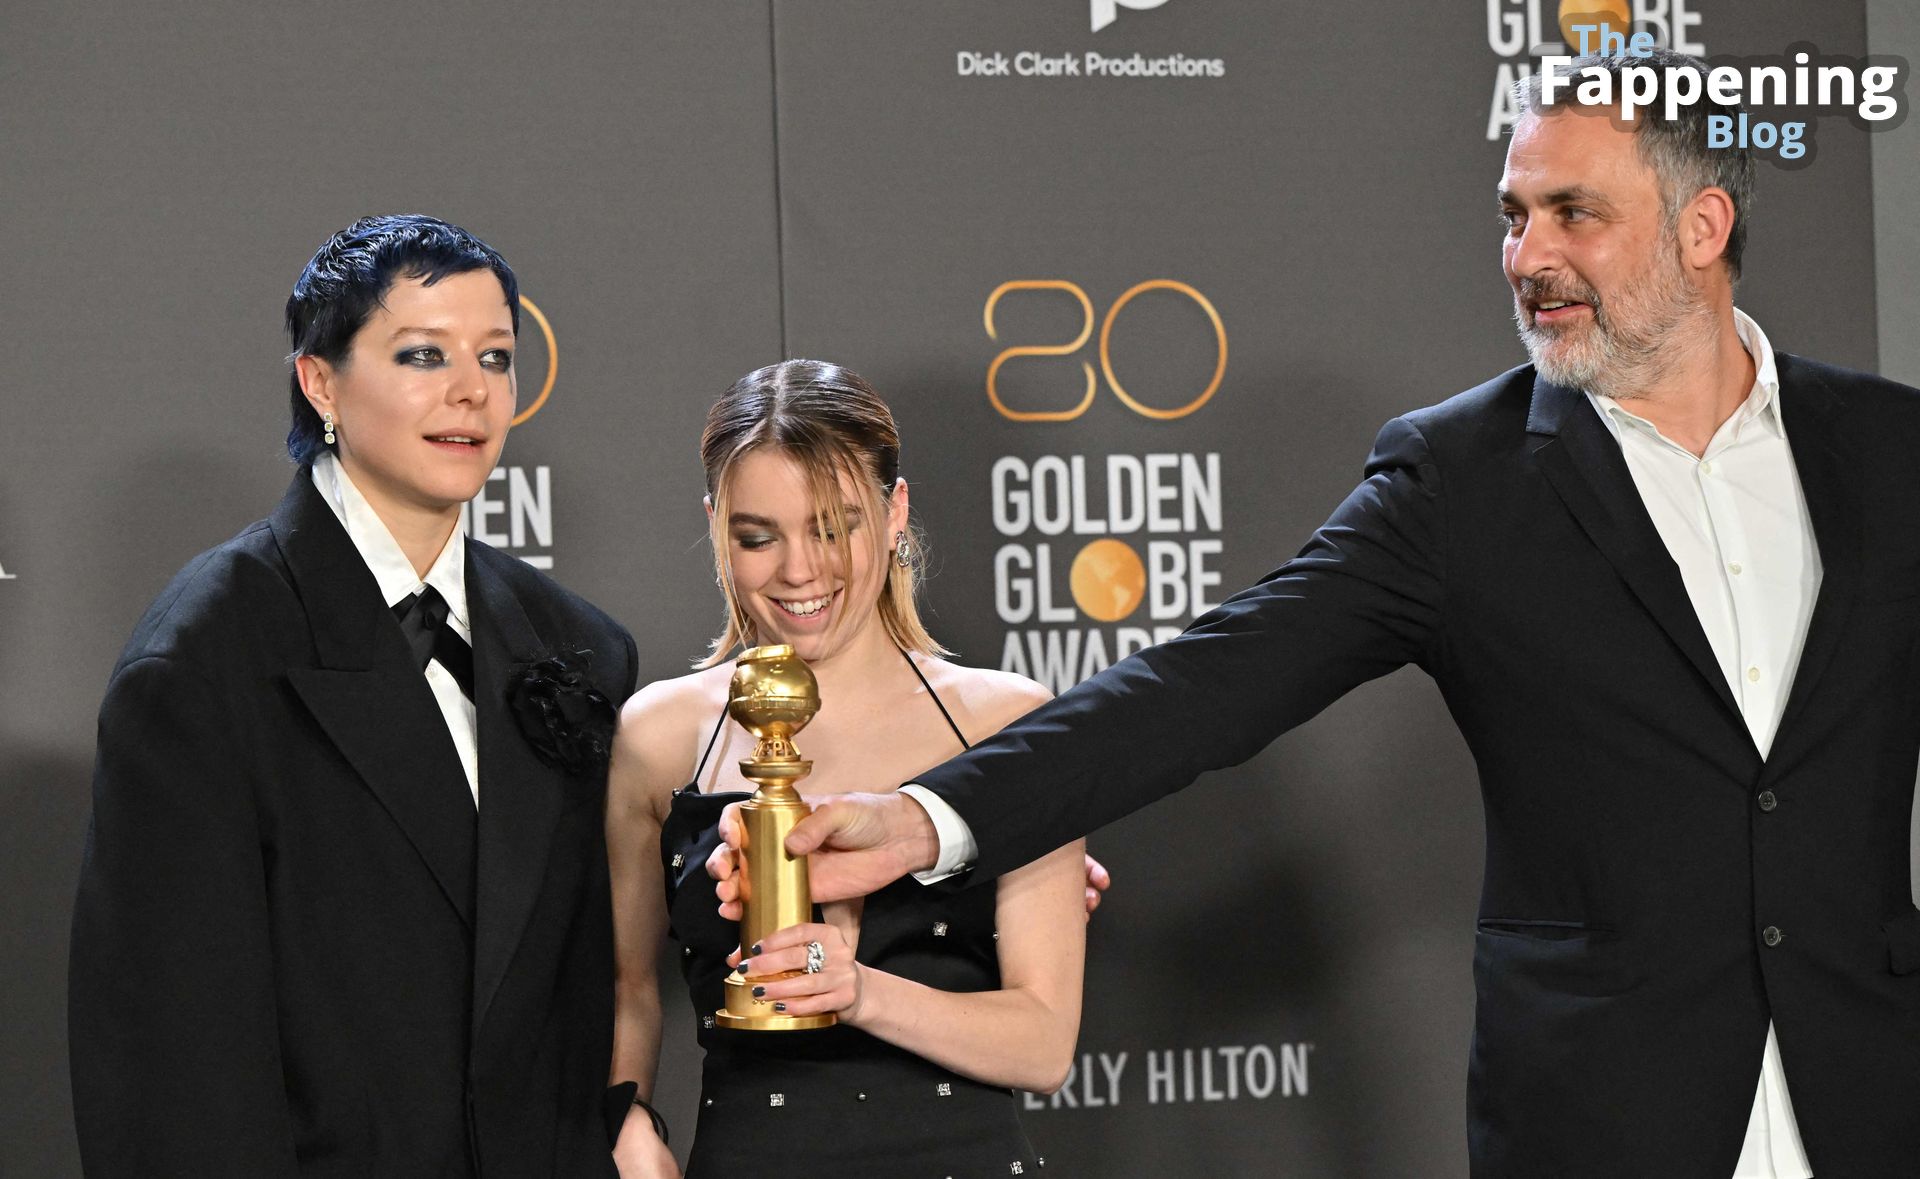 Milly Alcock Poses Braless at the 80th Annual Golden Globe Awards (61 Photos)